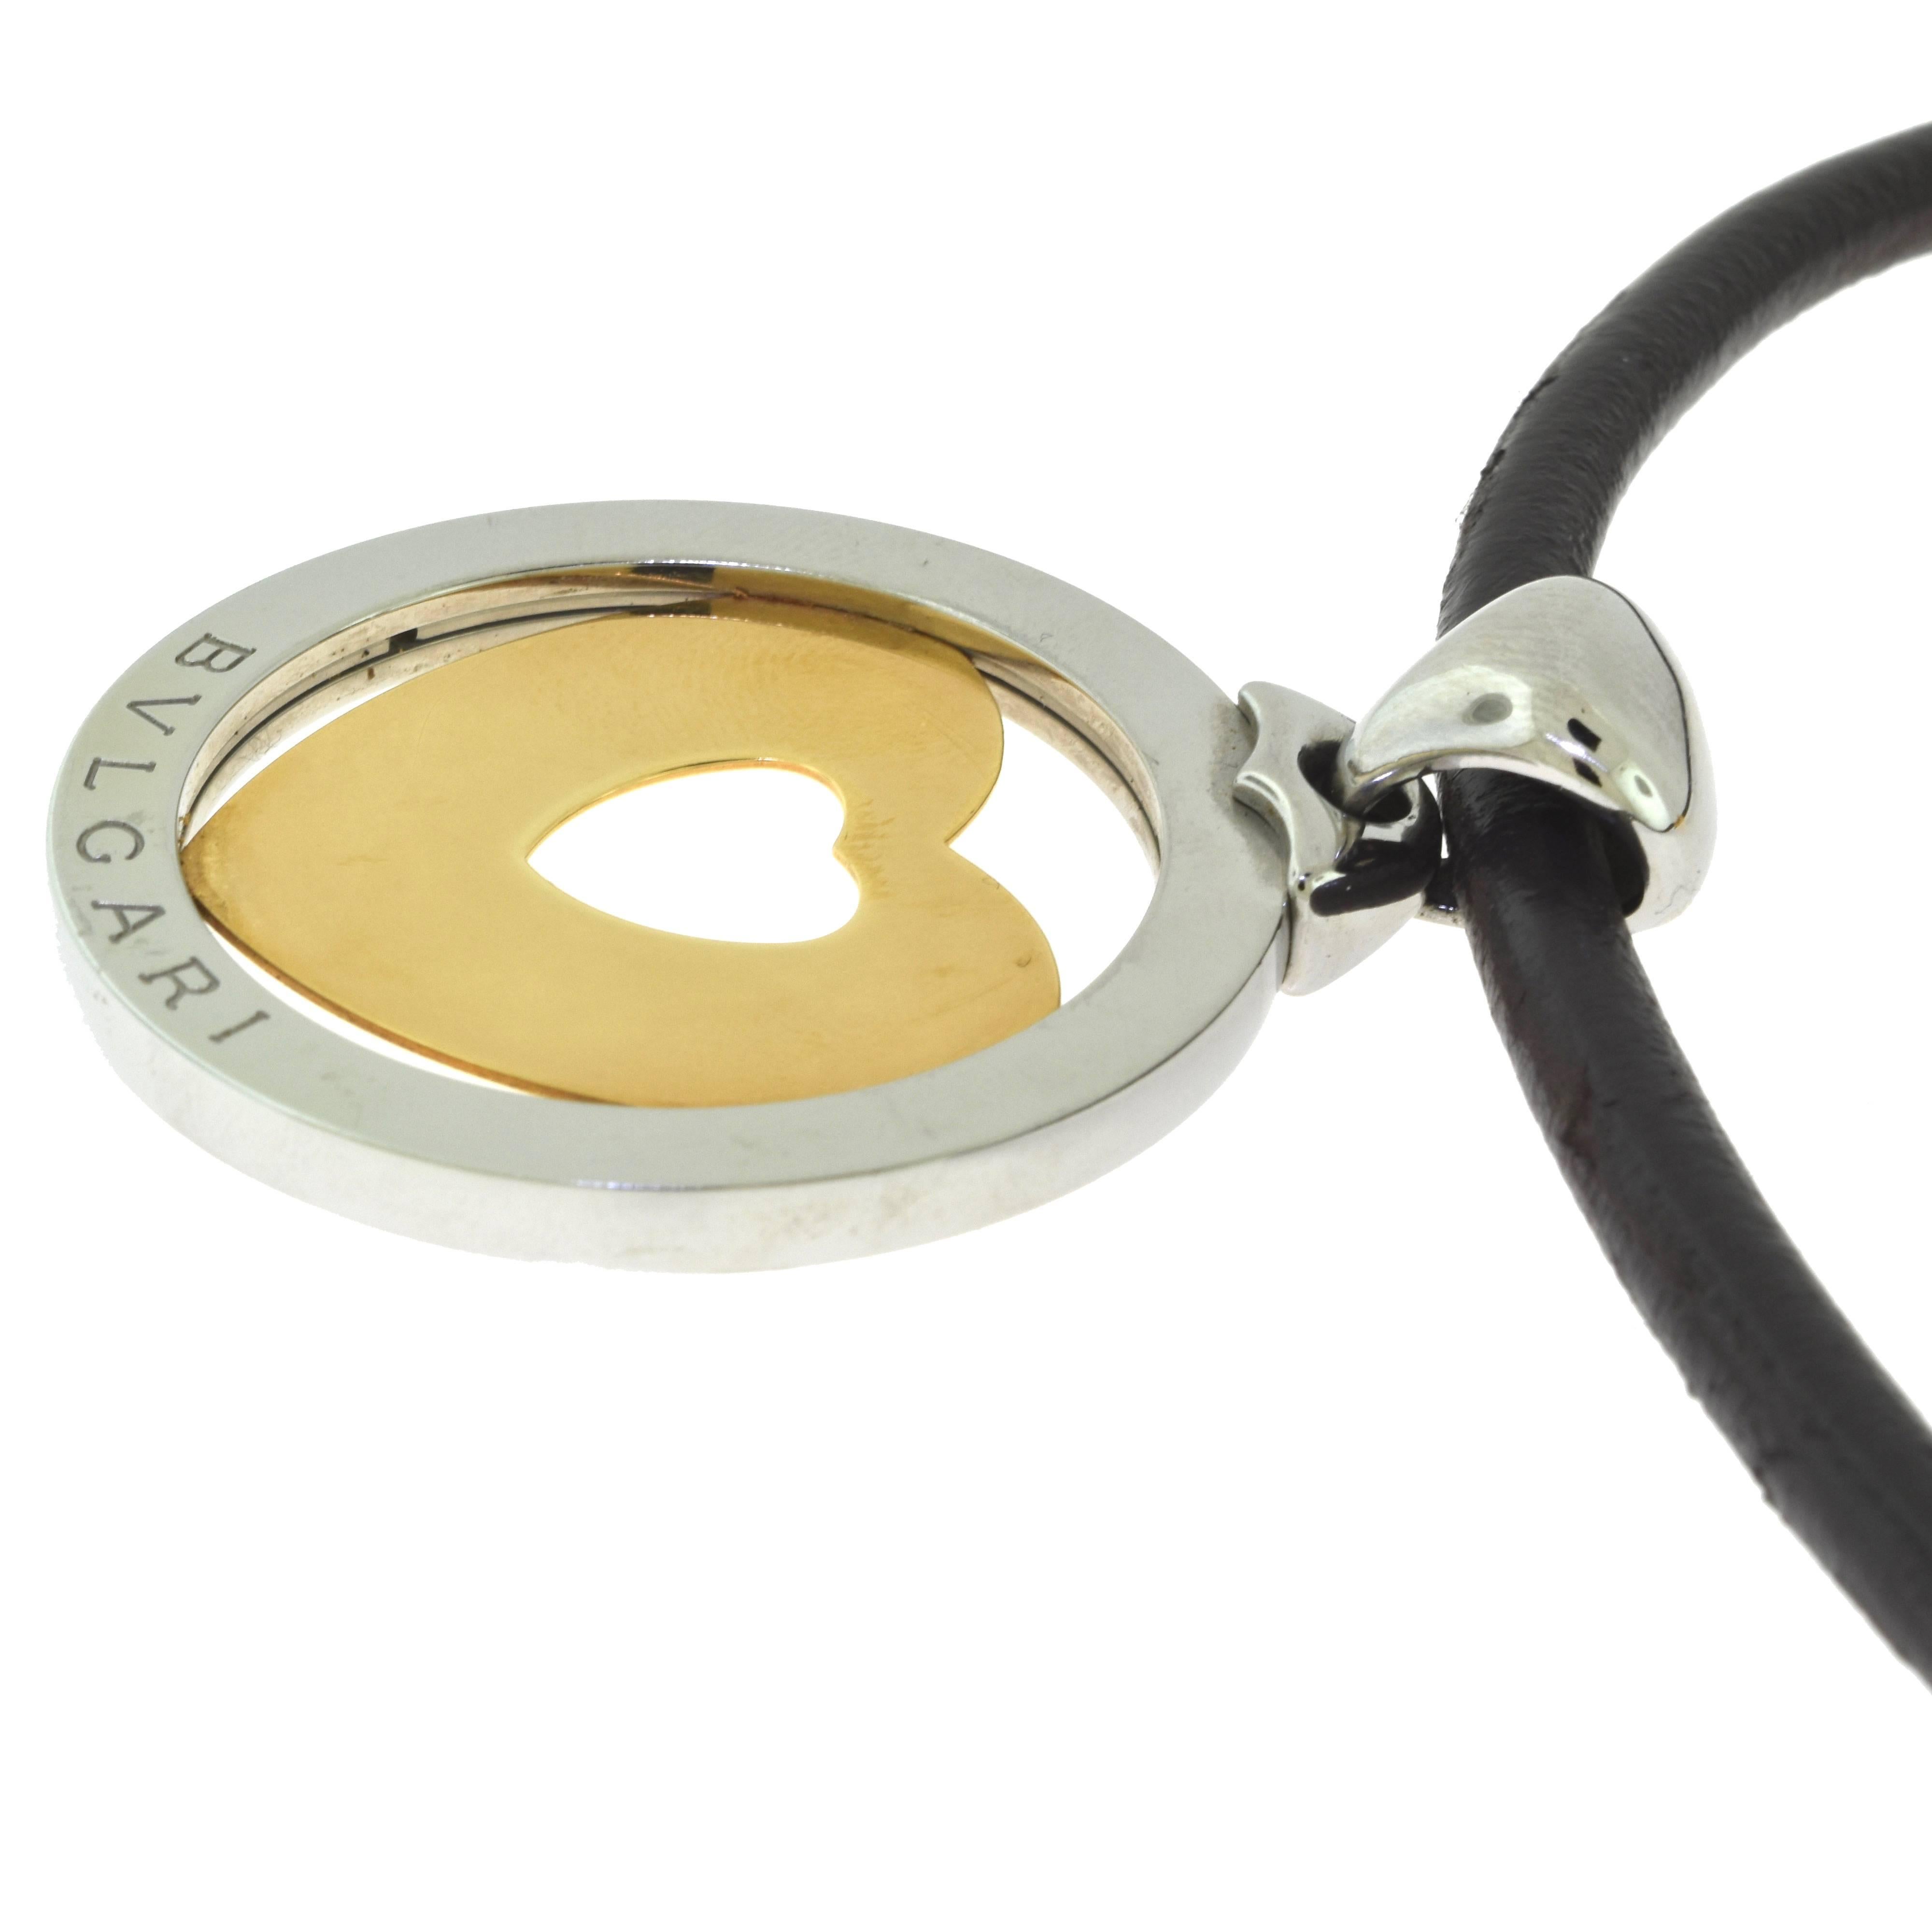 Designer: Bvlgari
Collection: Tondo
Style: Pendant
Theme: Heart
Metal: 18k Yellow Gold ; Stainless Steel
Total Item Weight (g): 25.5 (just the pendant) ; 41.3 (with leather chain)
Chain: Dark Brown Leather
Chain Length: 14.75 inches
Diameter: